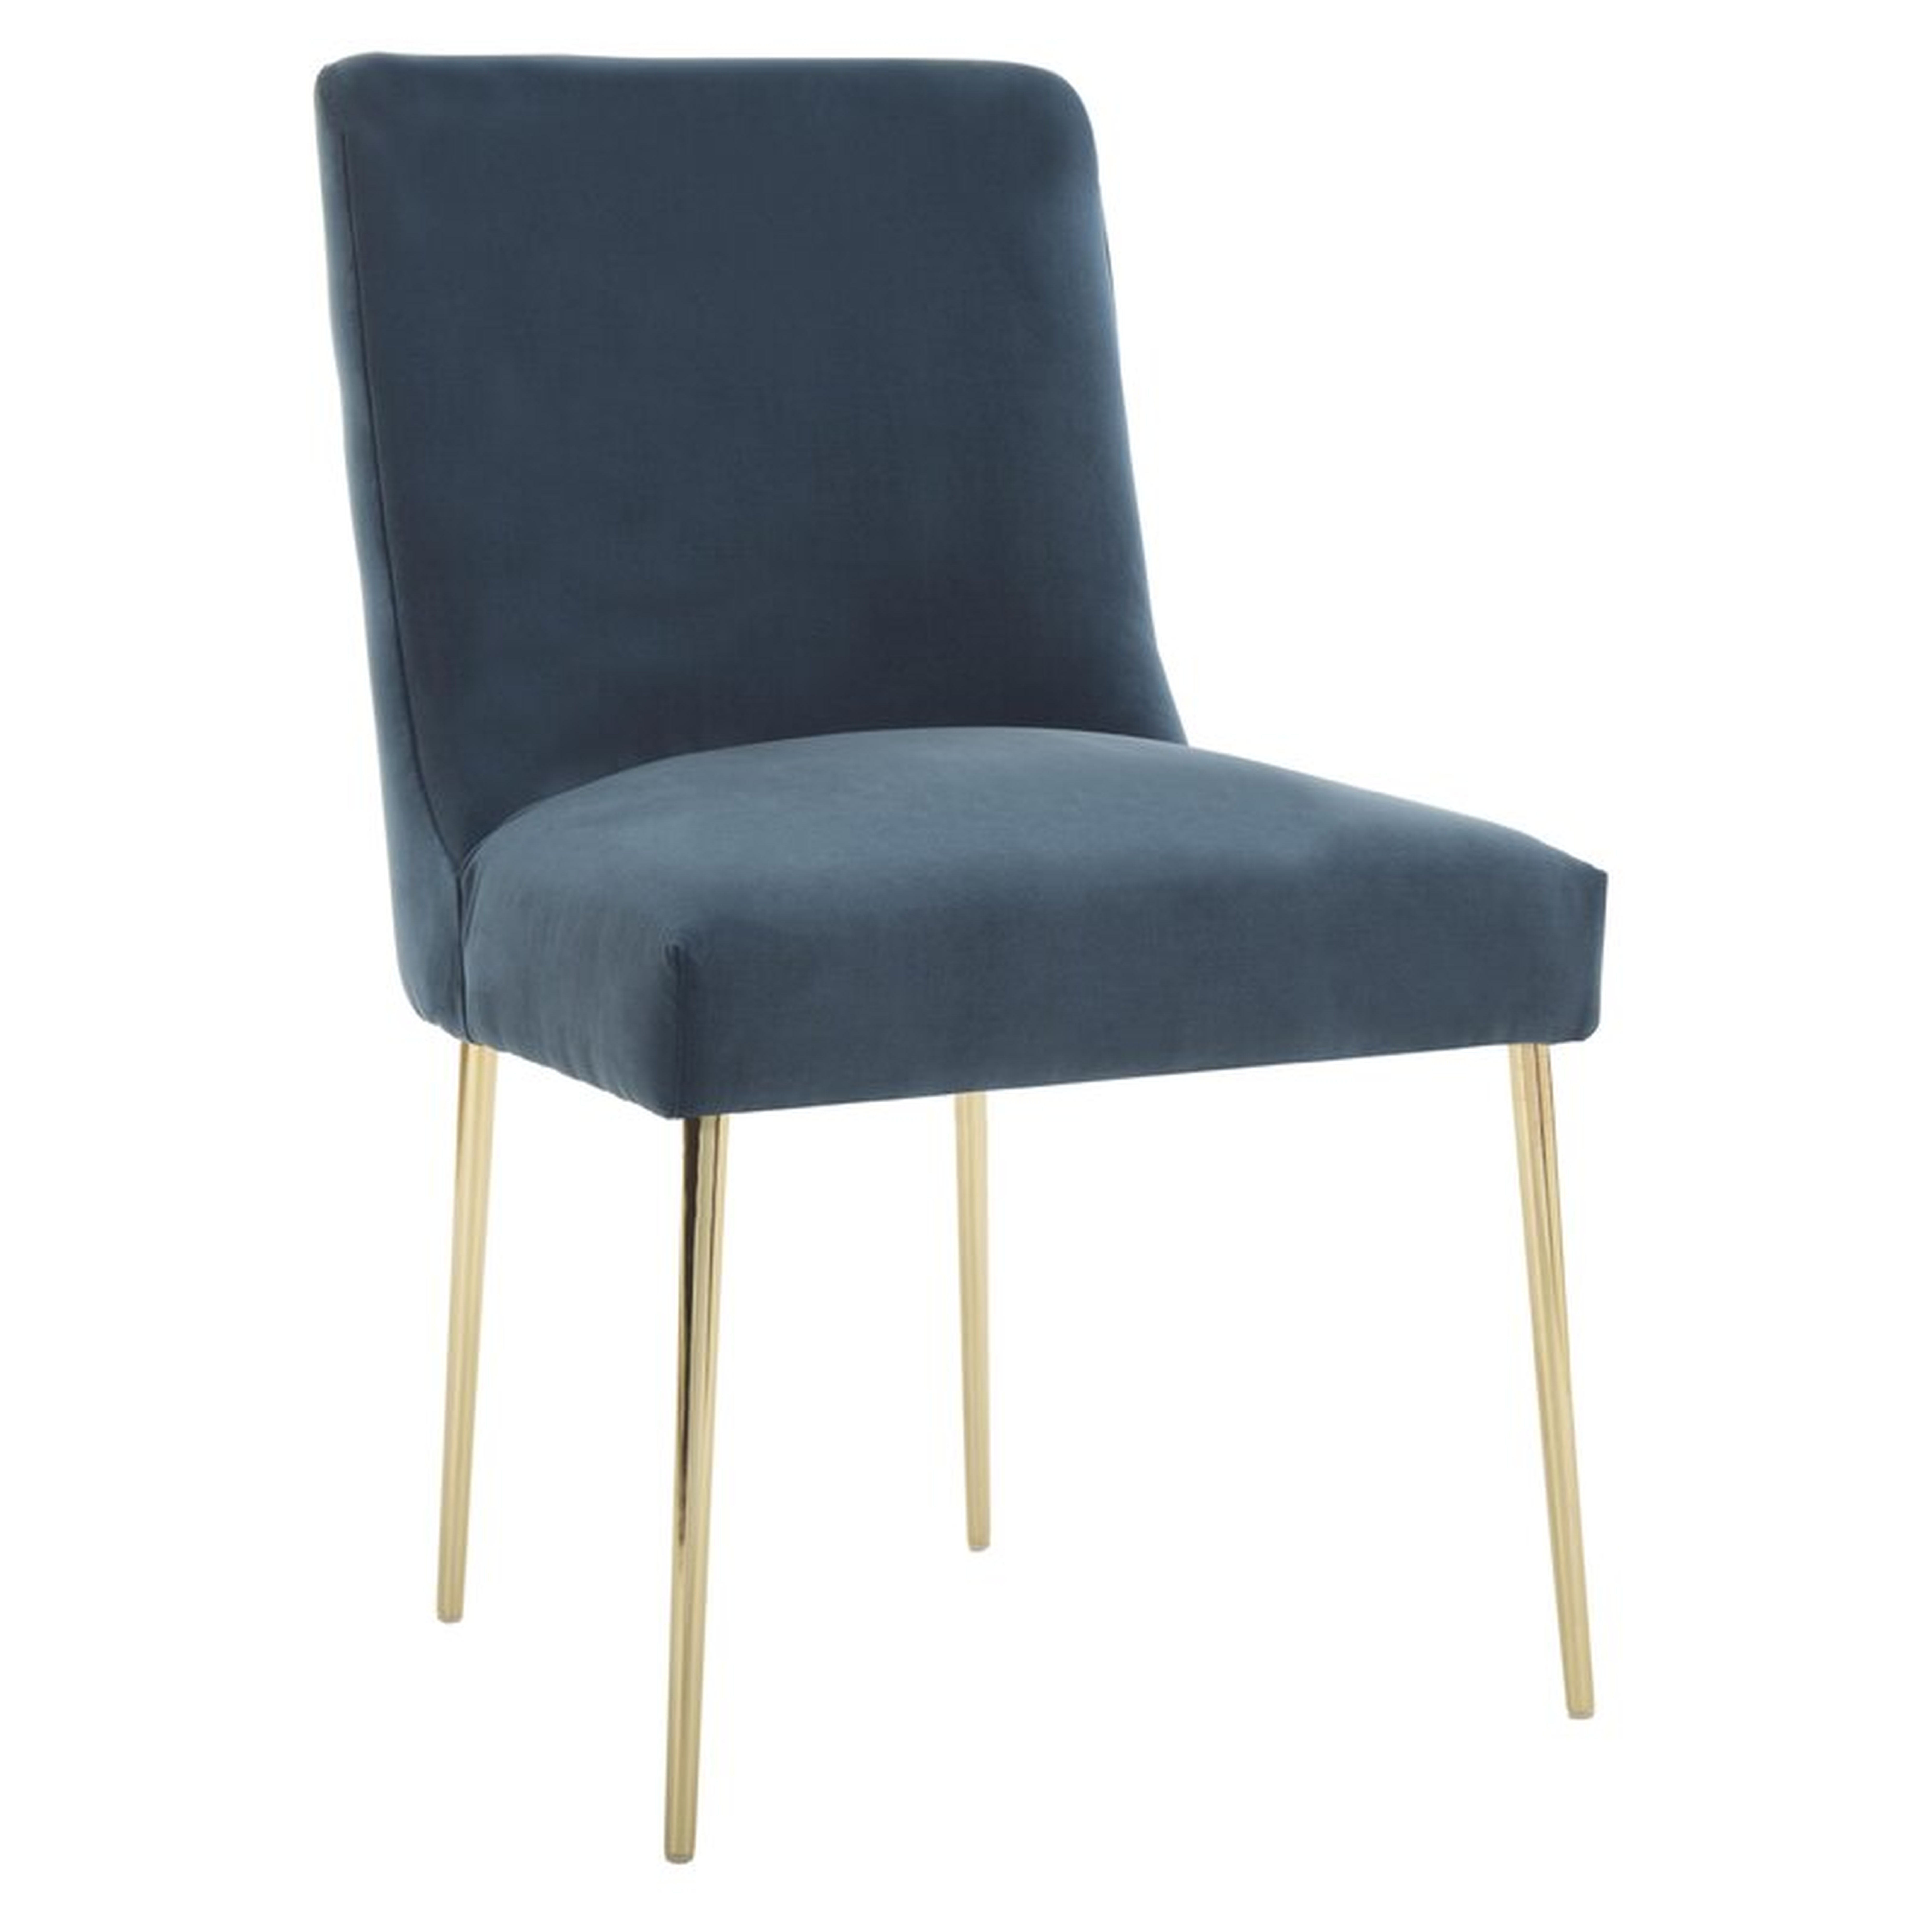 Safavieh Couture Nolita Upholstered Dining Chair Upholstery Color: Aegean Blue - Perigold